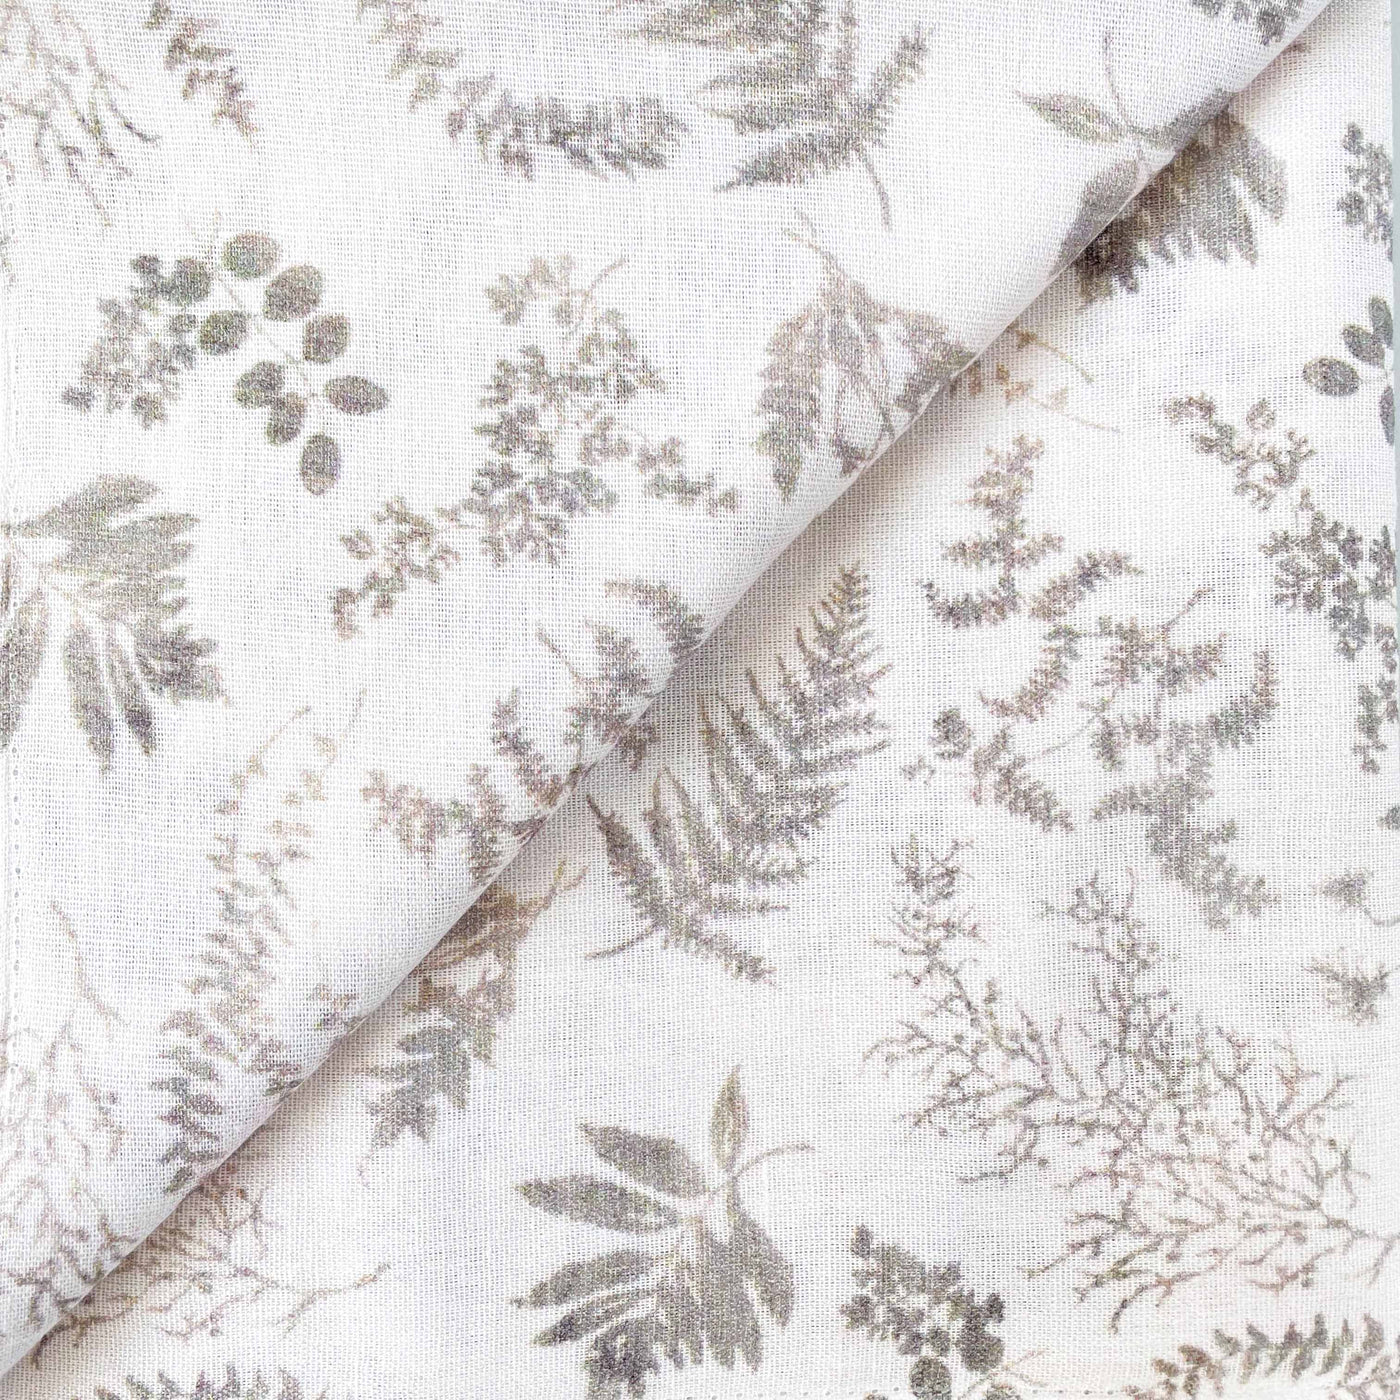 Printed Cotton Linen Fabric Cut Piece (CUT PIECE) Faded Grey Tropical Bliss Printed Pure Cotton Linen Fabric (Width 44 Inches)